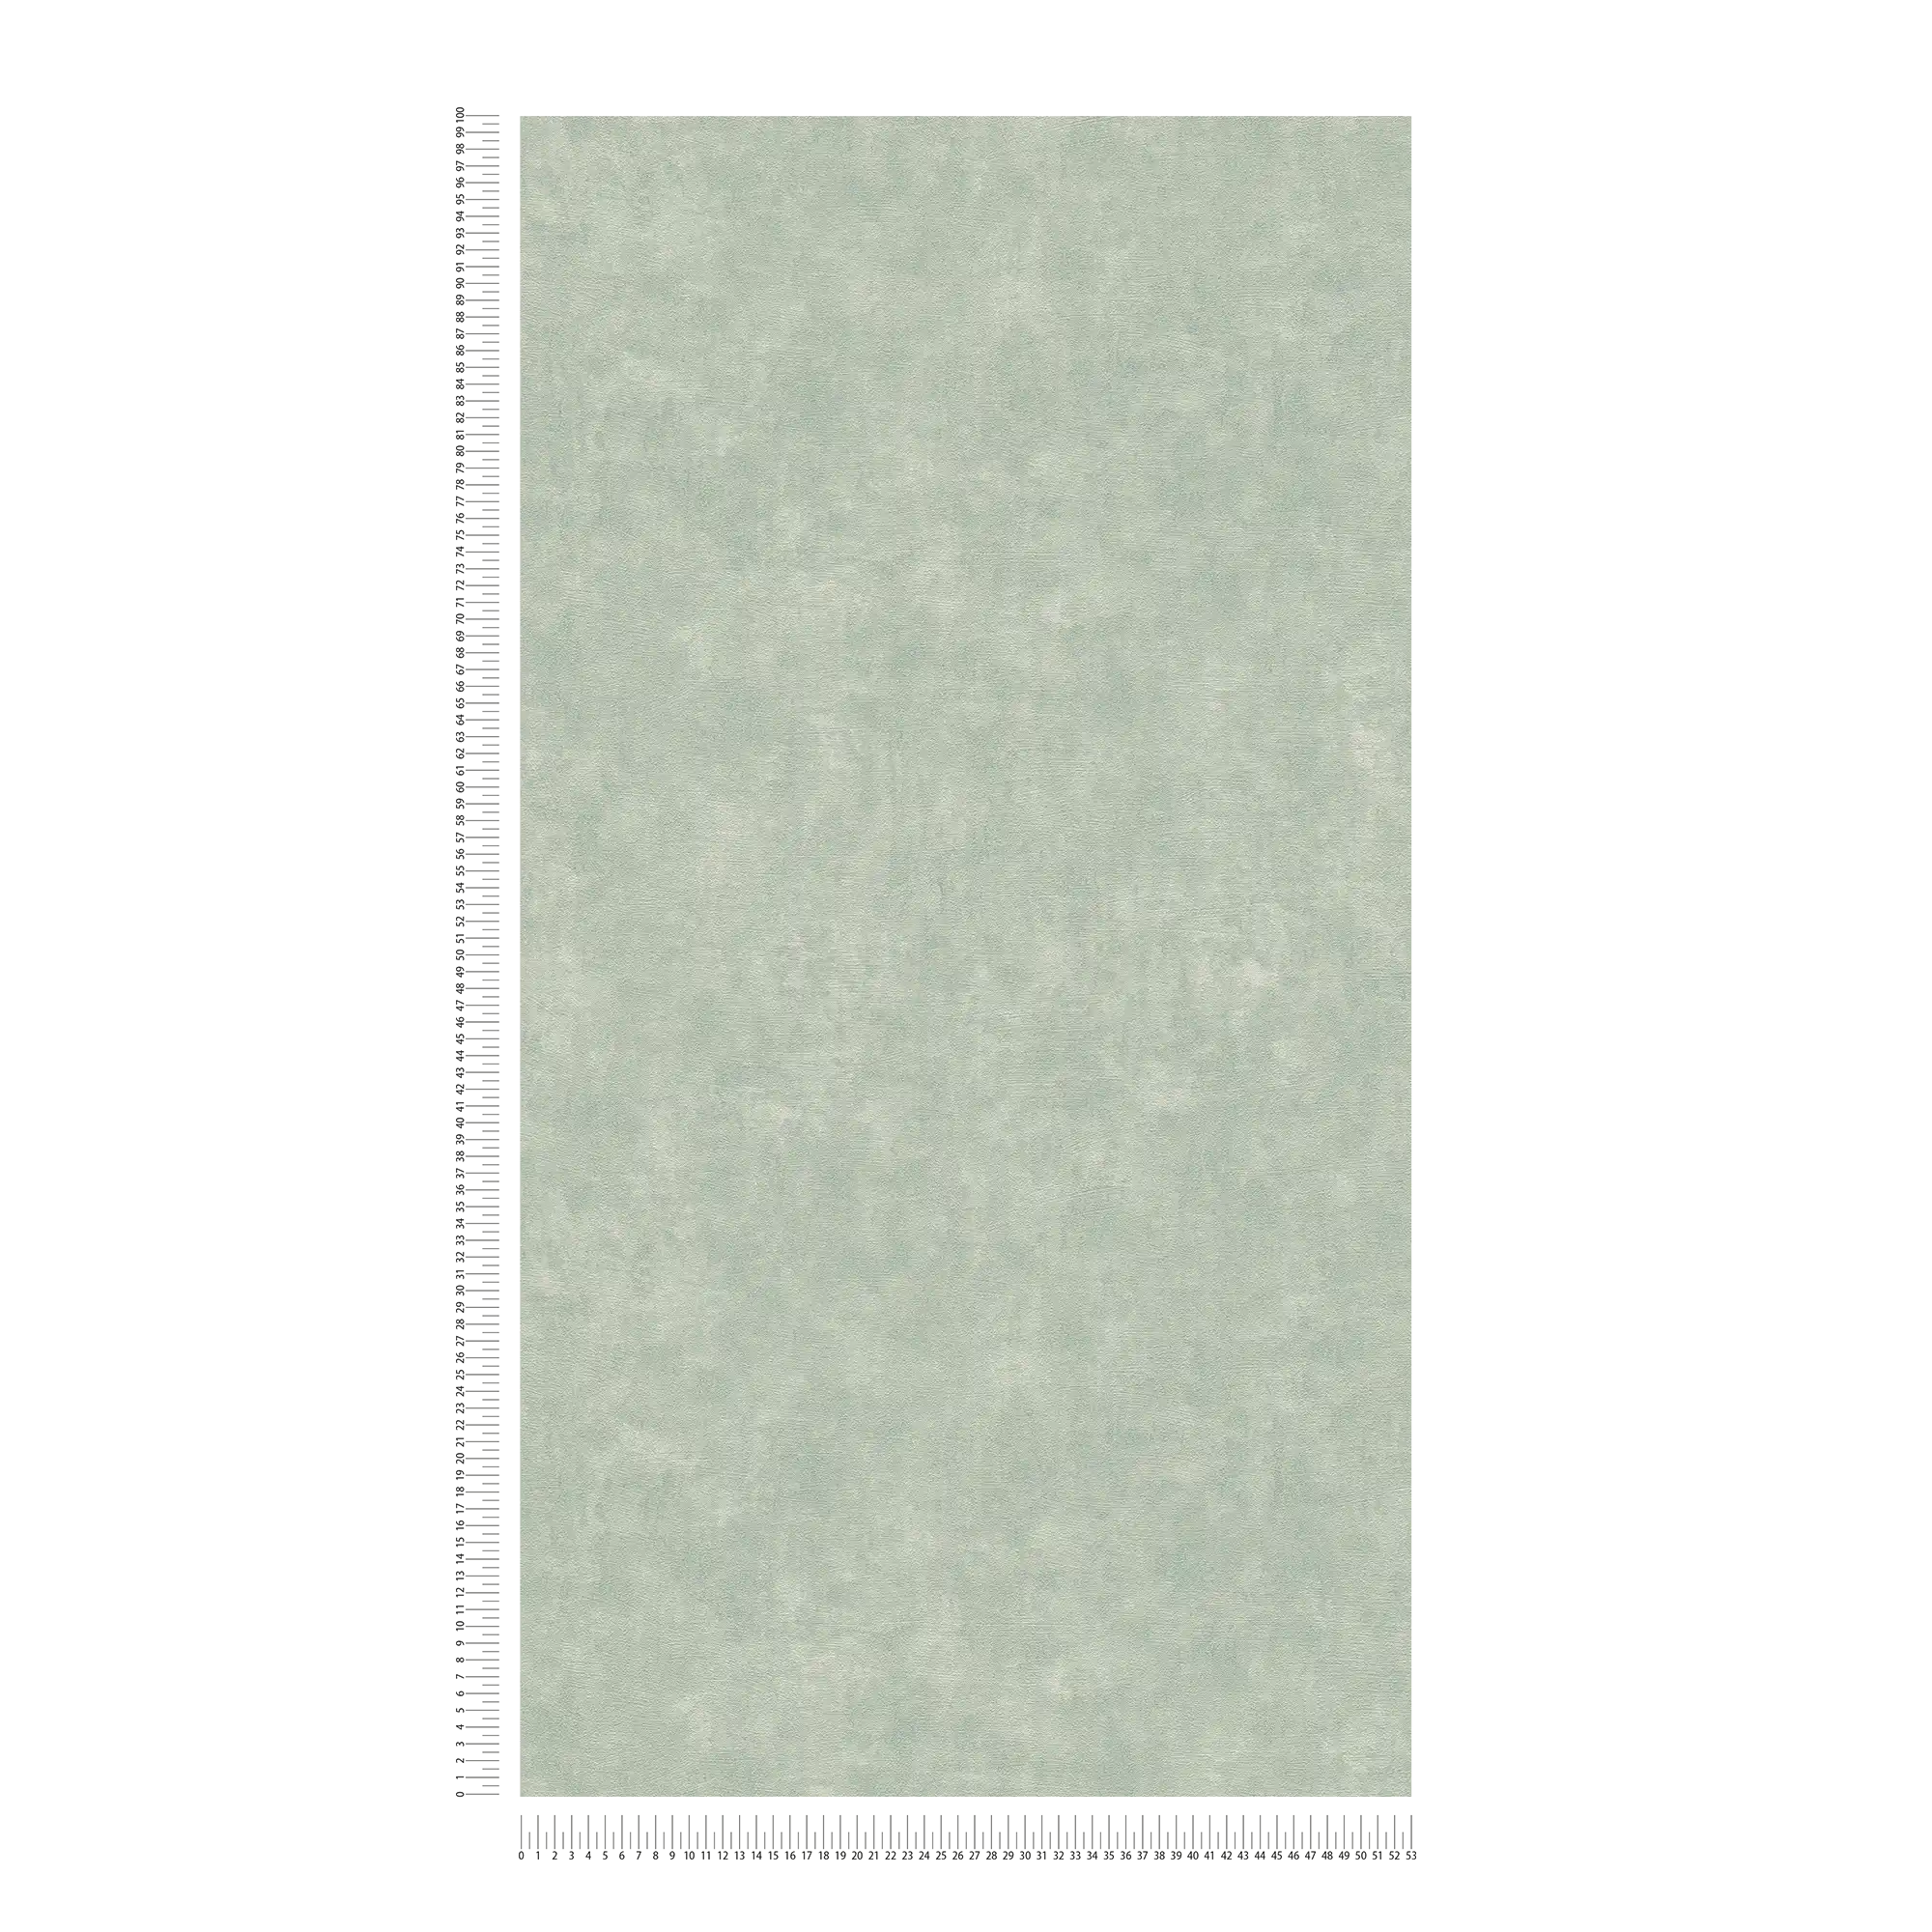             Non-woven wallpaper with textured pattern plain - green
        